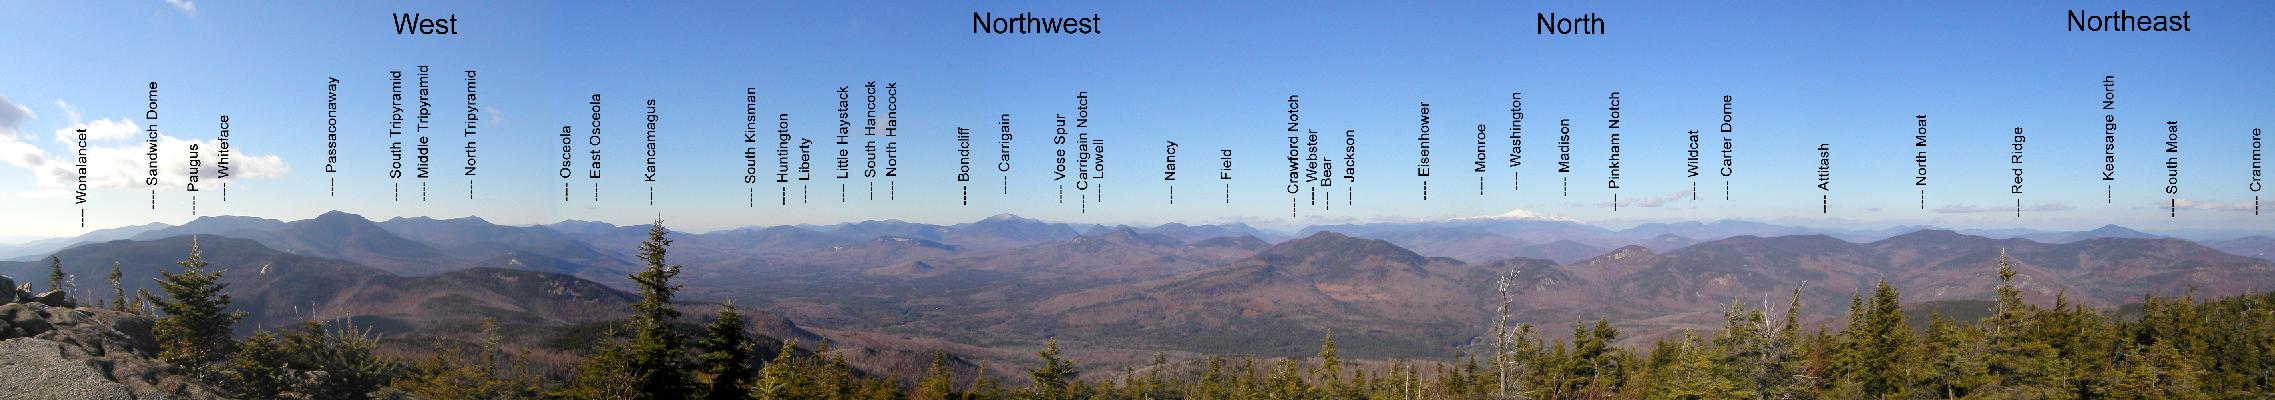 panoramic view of the White Mountains from Middle Sister Mountain in New Hampshire